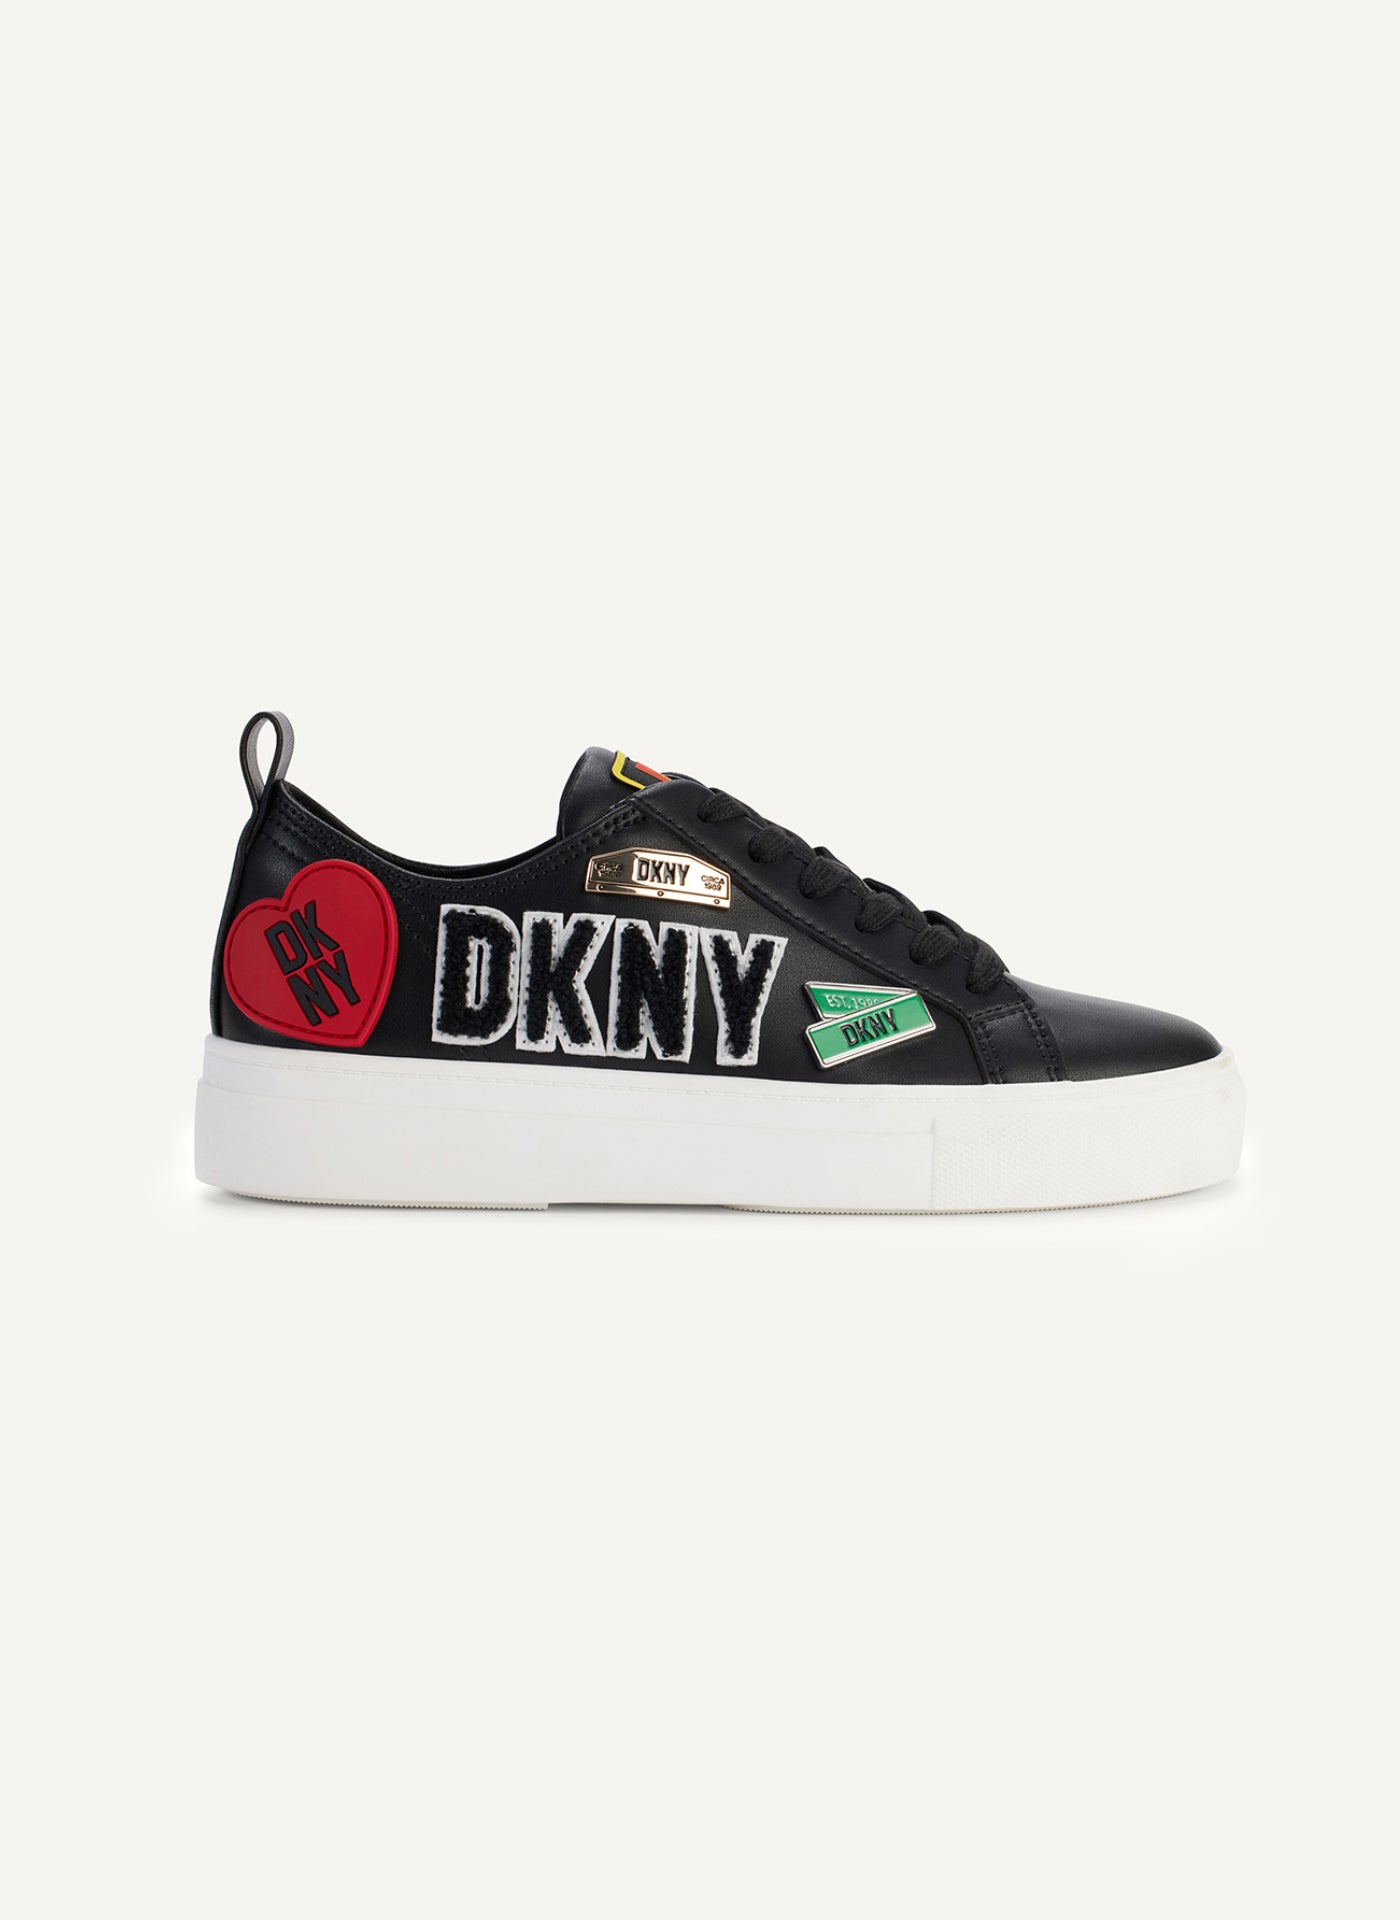 DKNY COREEN CITY SIGNS LACE UP SNEAKER,Black